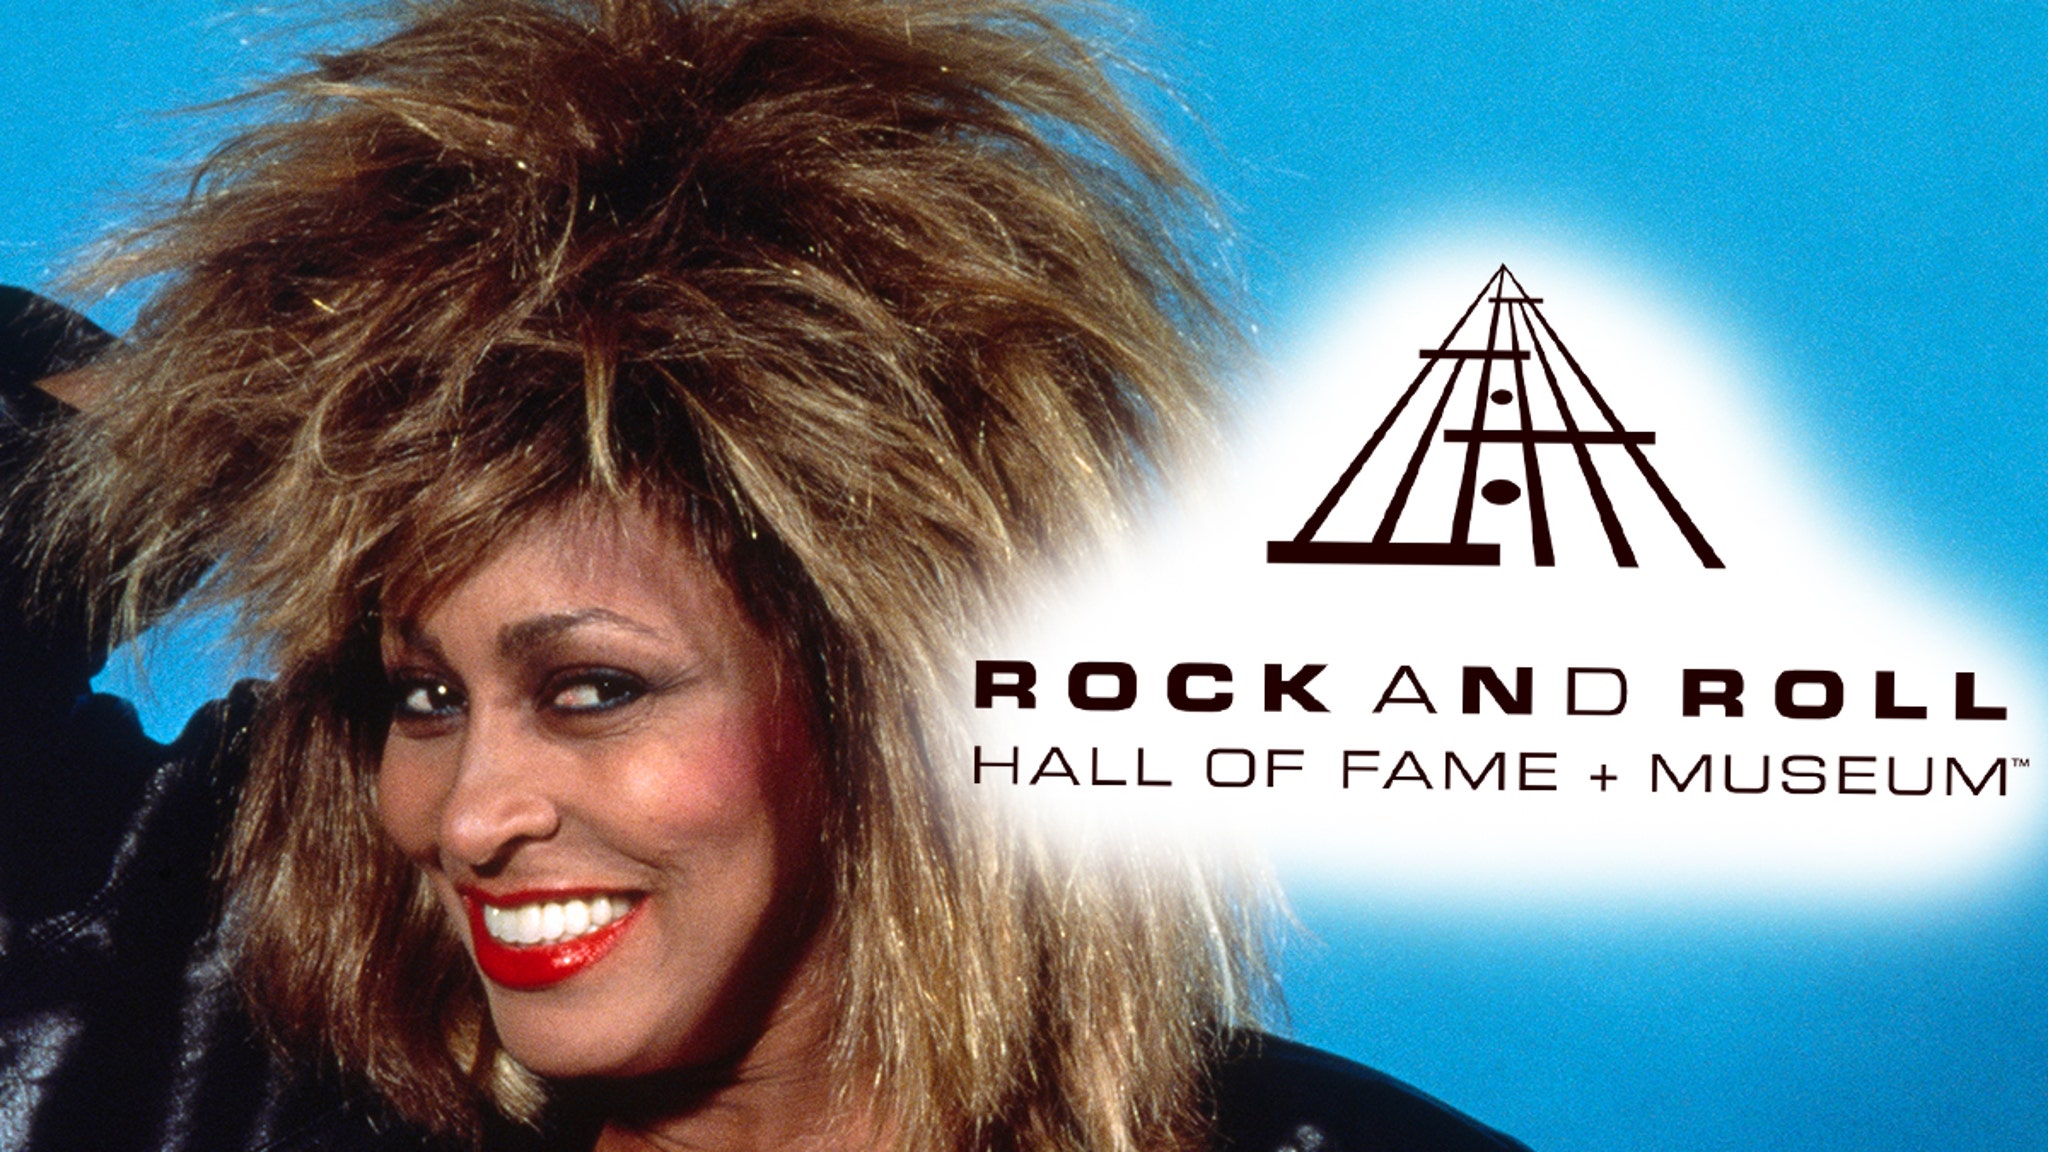 Tina Turner fans outraged that she’s not in rock & roll HOF Solo